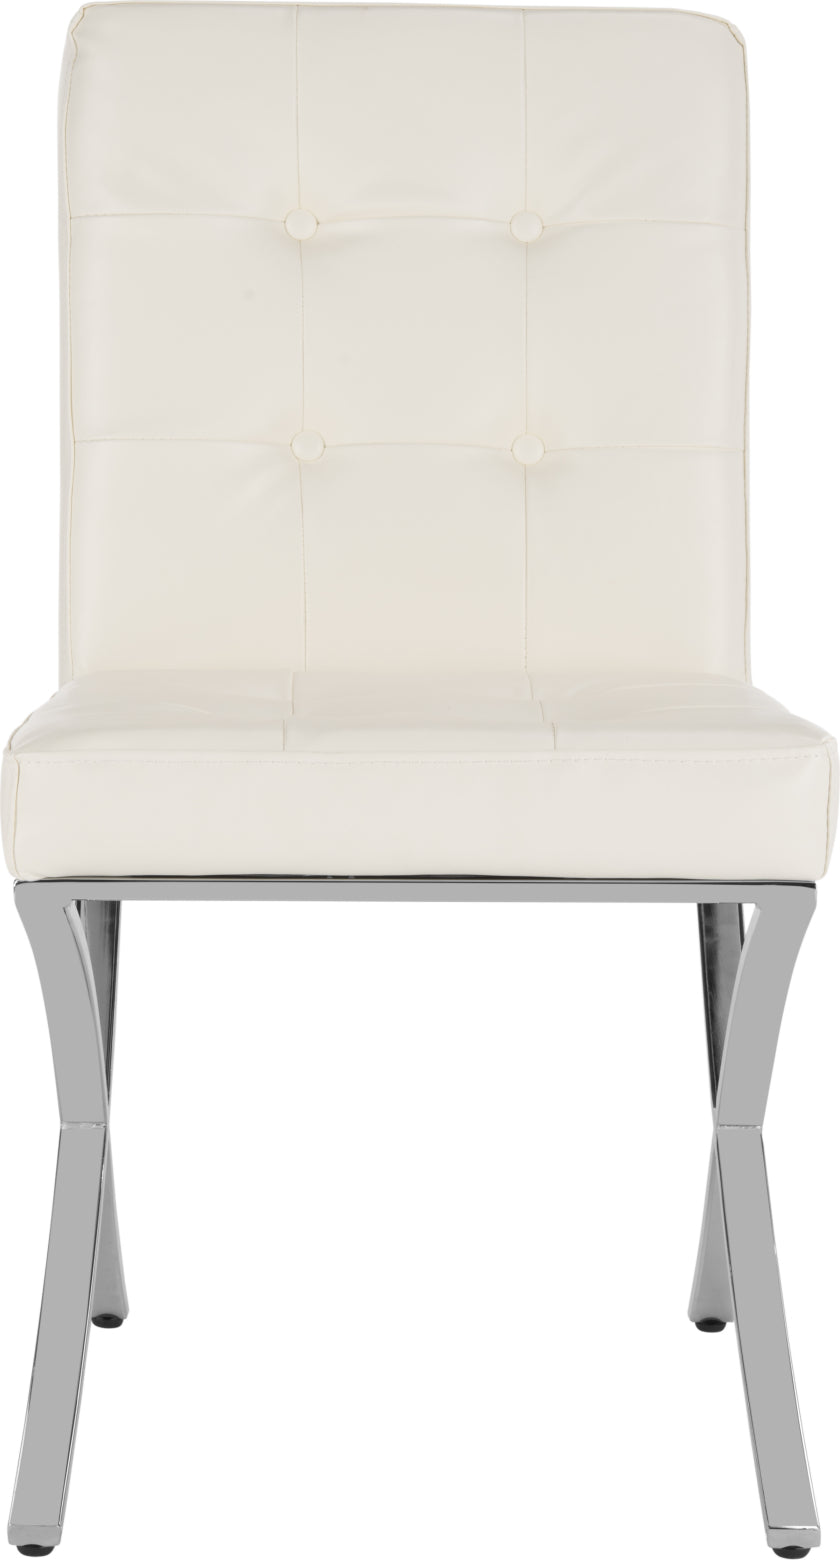 Safavieh Walsh Tufted Side Chair White and Chrome Furniture main image